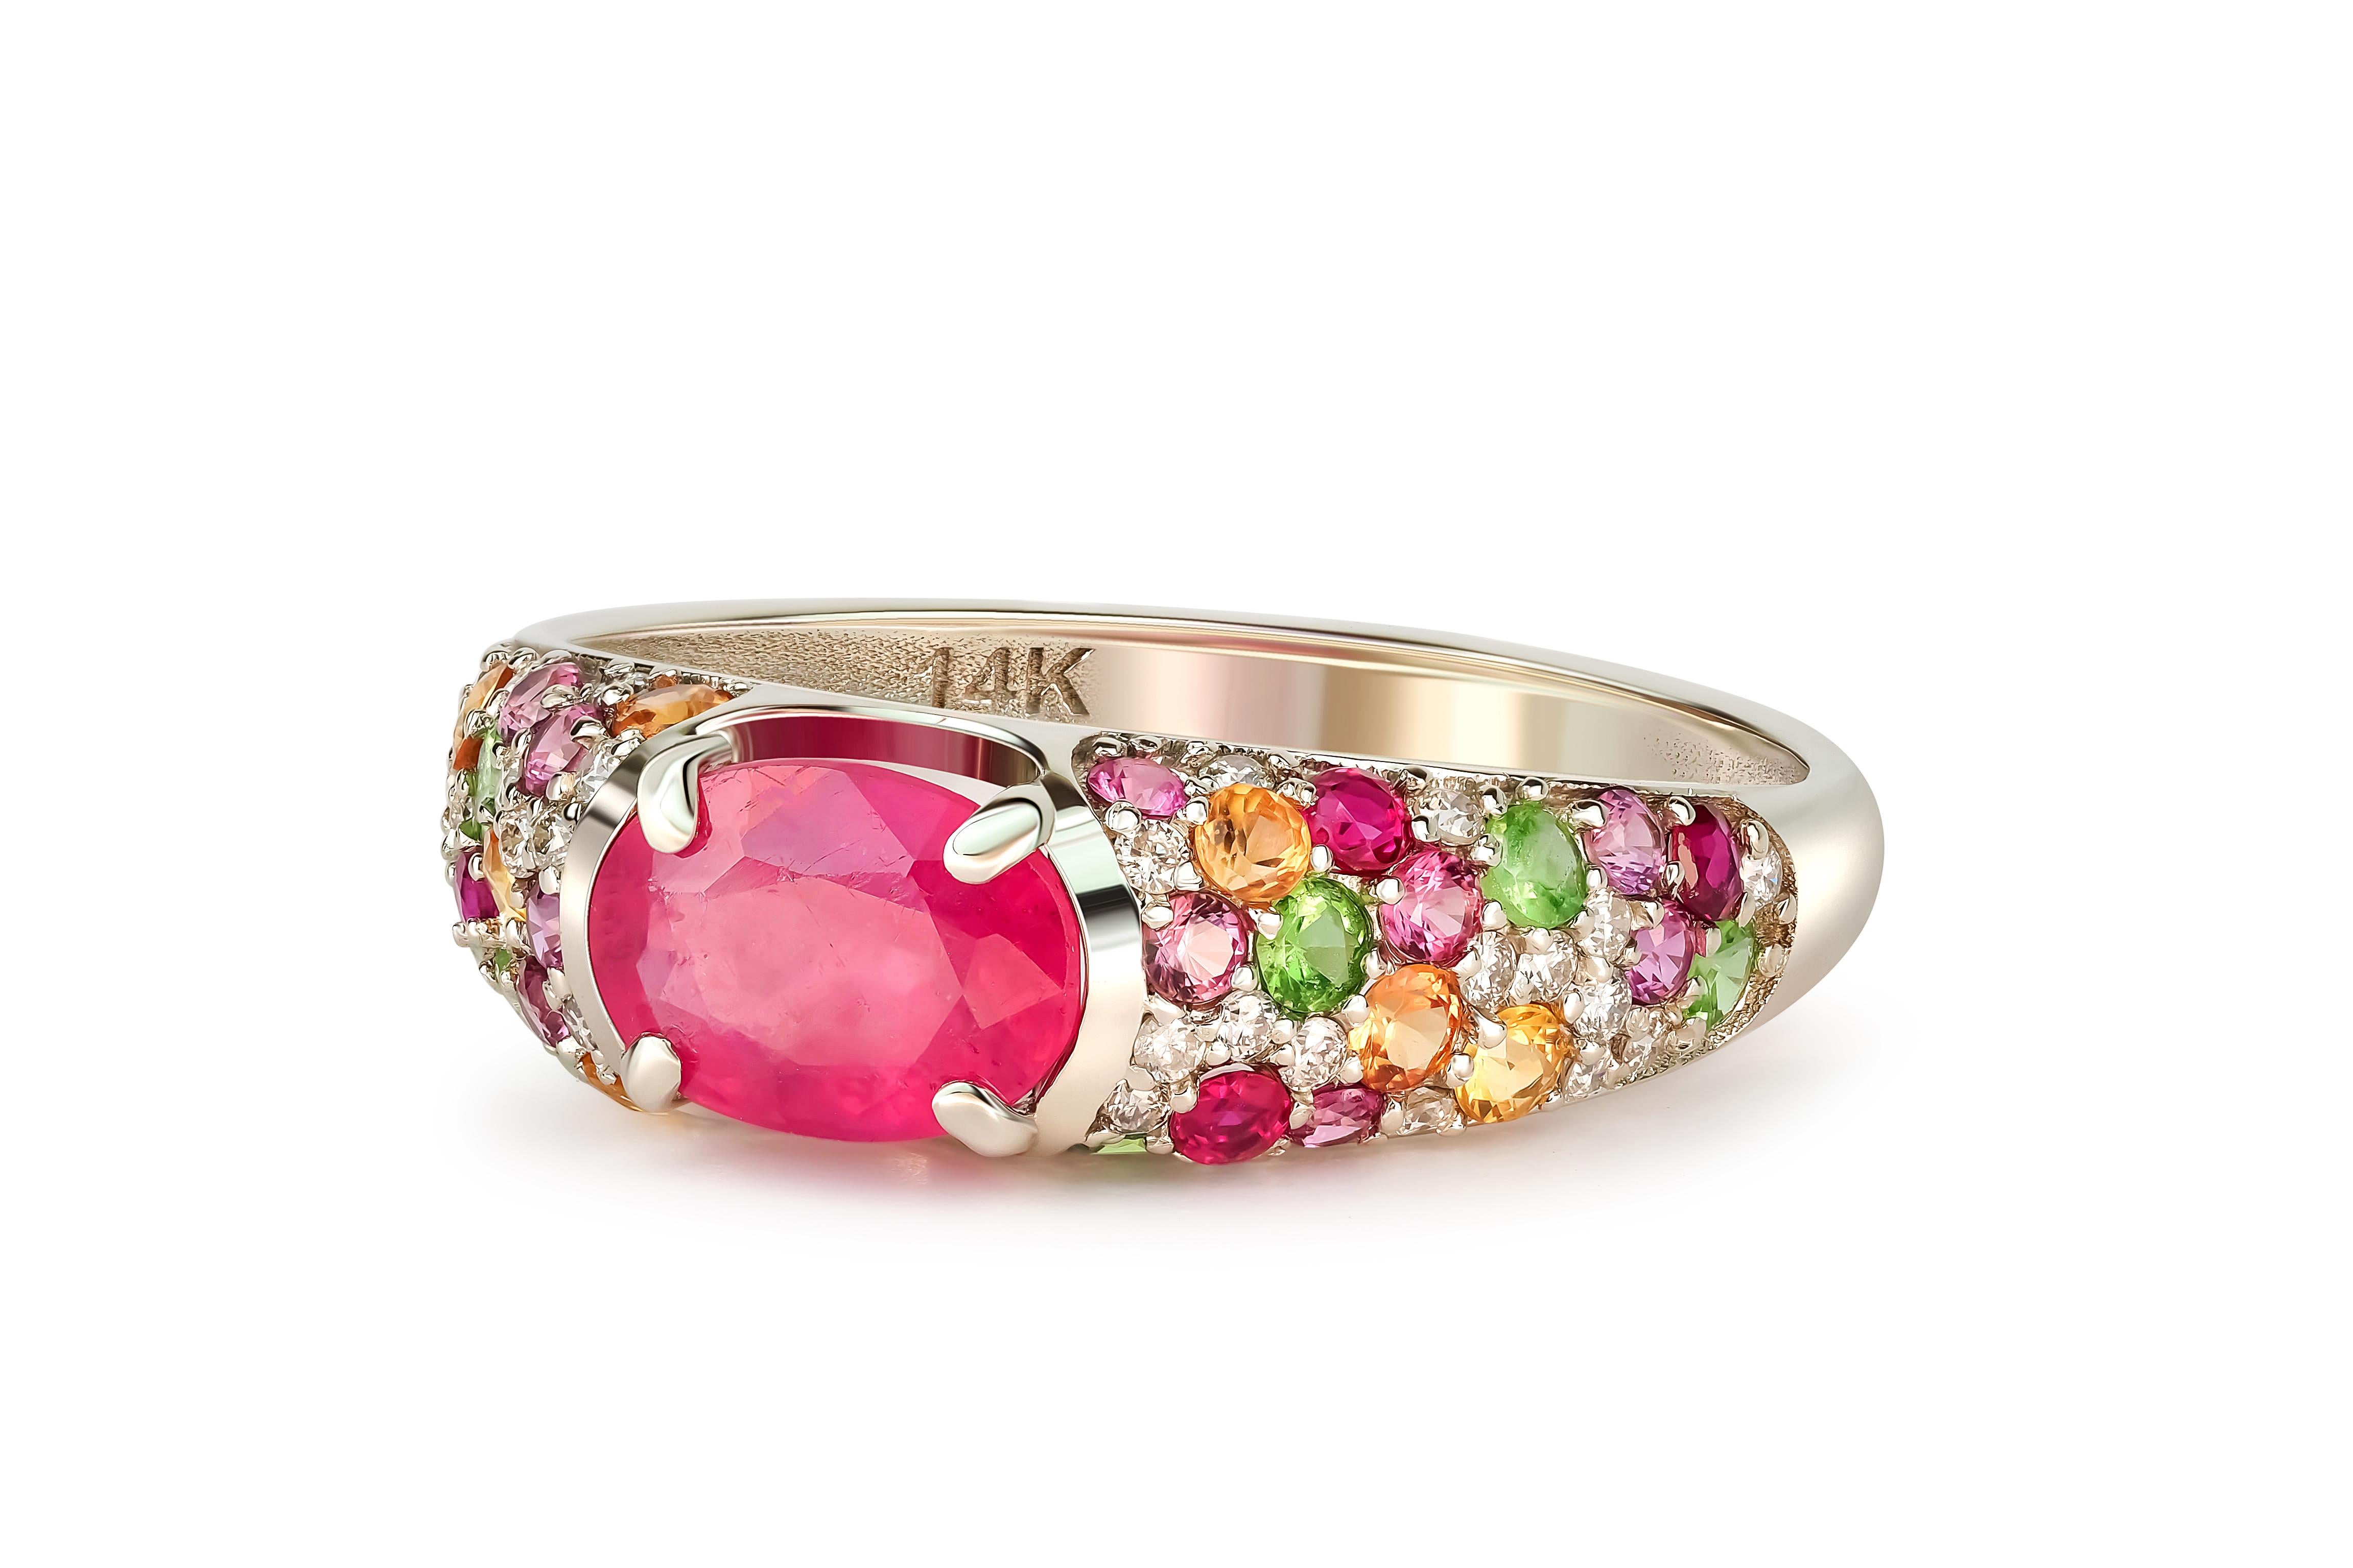 For Sale:  14k gold ruby and multicolored gemstones ring. 4